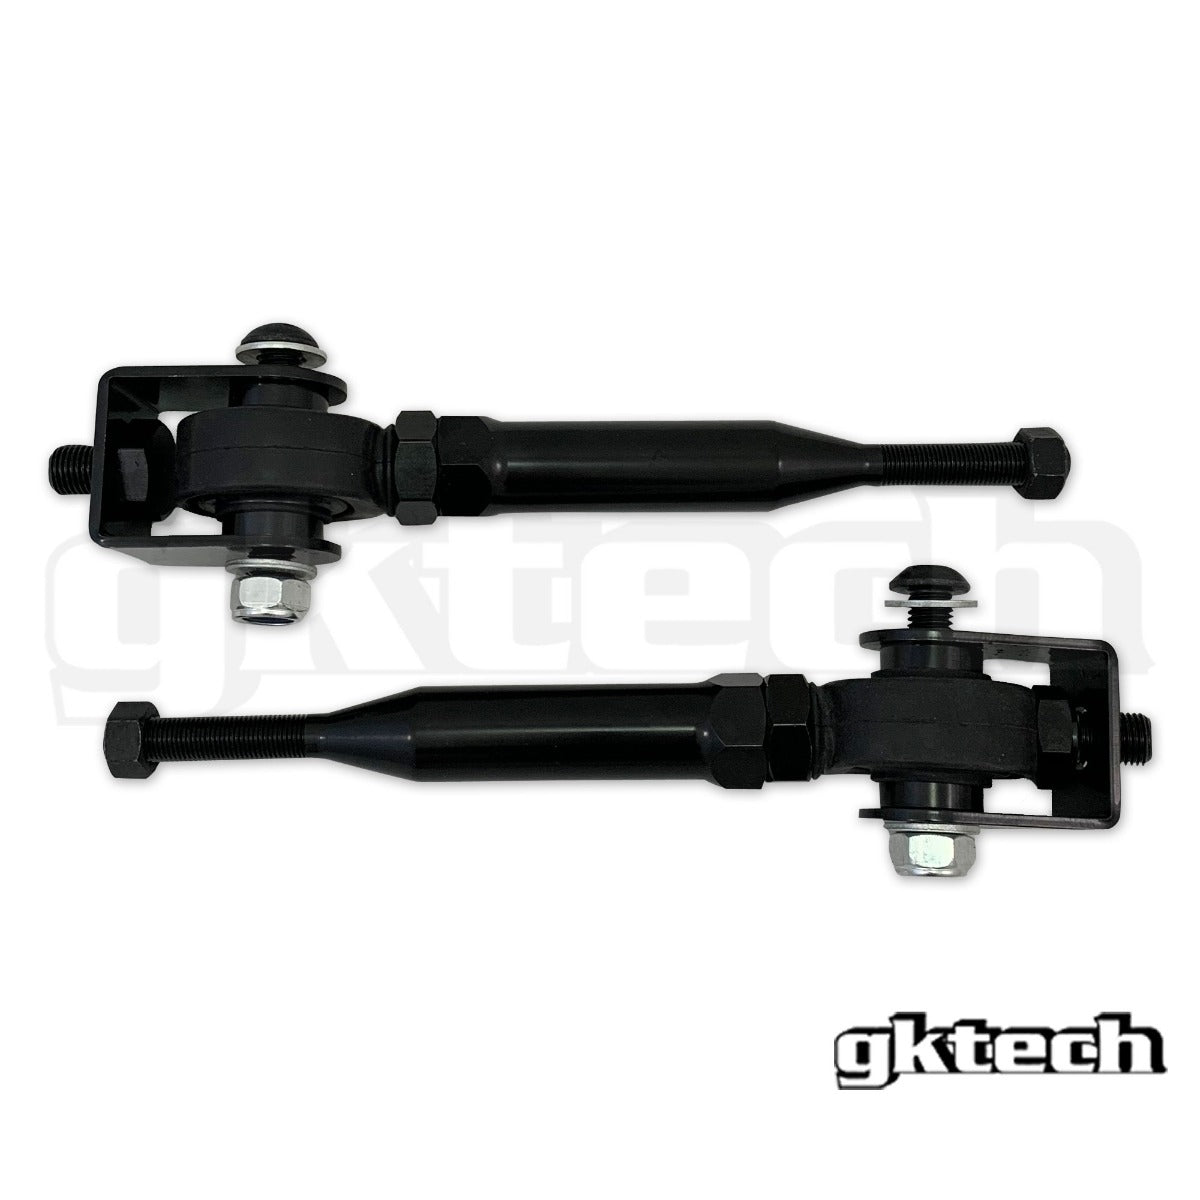 S13/180sx/R32 HICAS Tie rod Replacement Kit